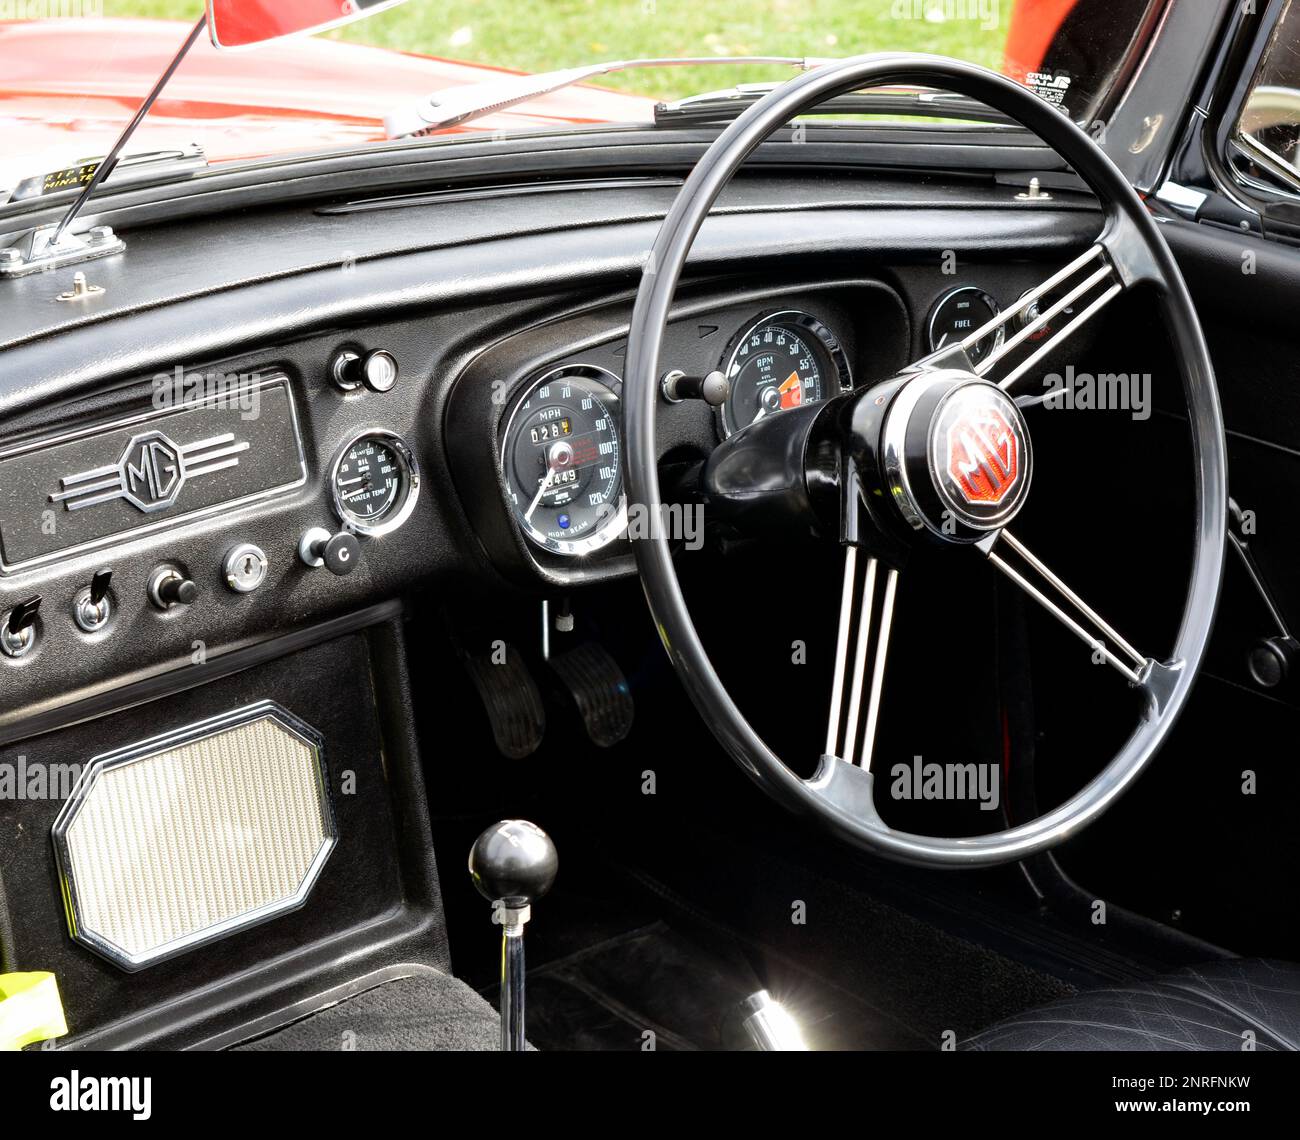 cockpit of classic open top MGB roadster sports car Stock Photo - Alamy